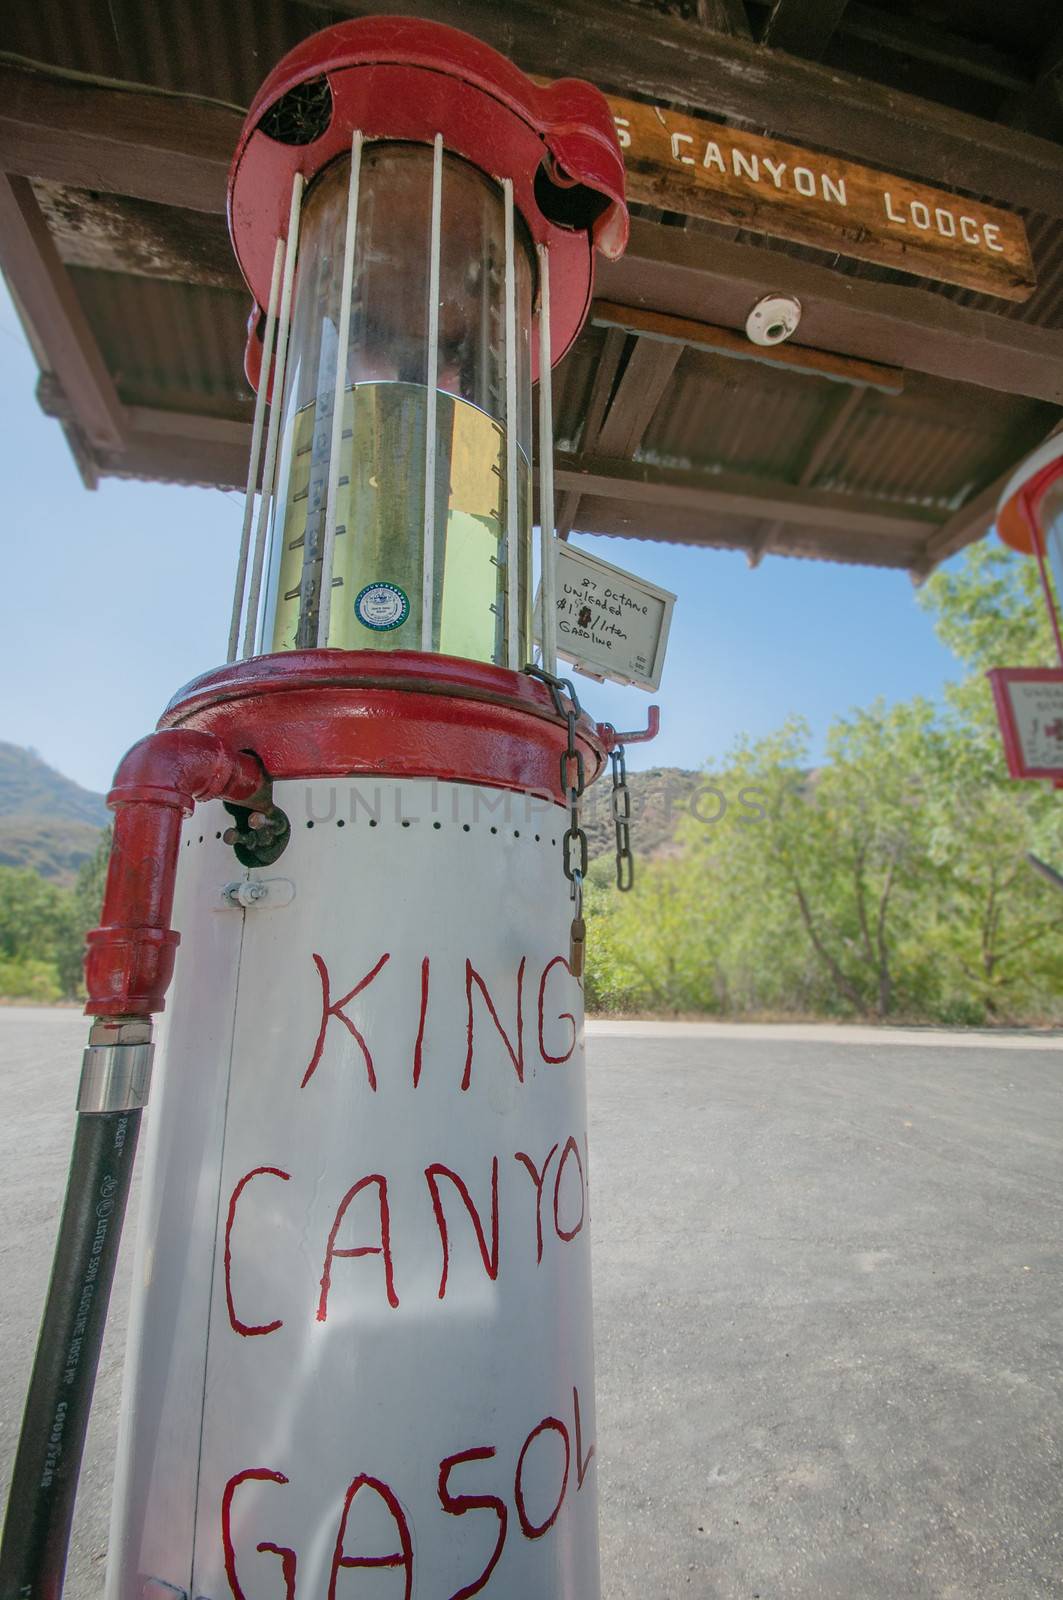 Kings canyon lodge gas station the last on this road